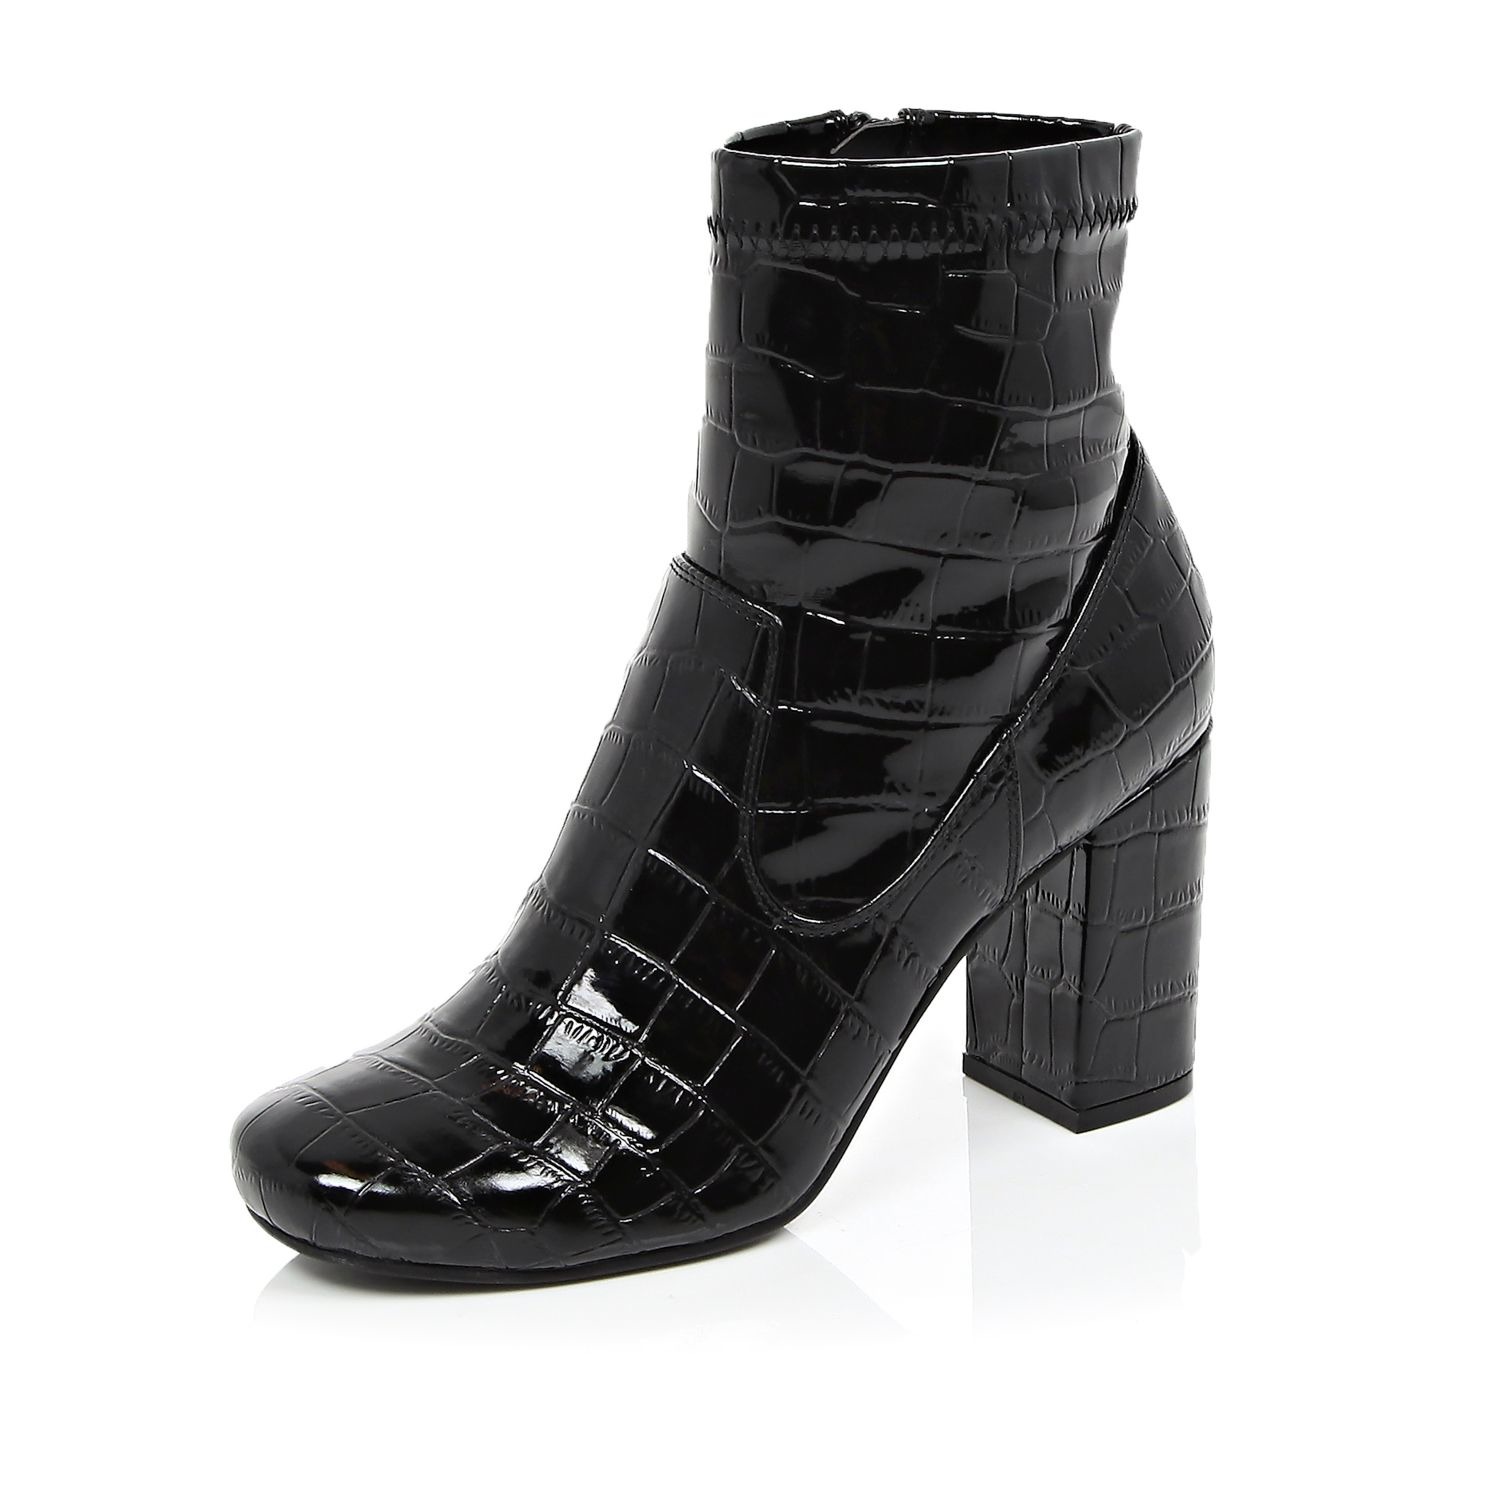 Black Patent Croc Heeled Ankle Boots 